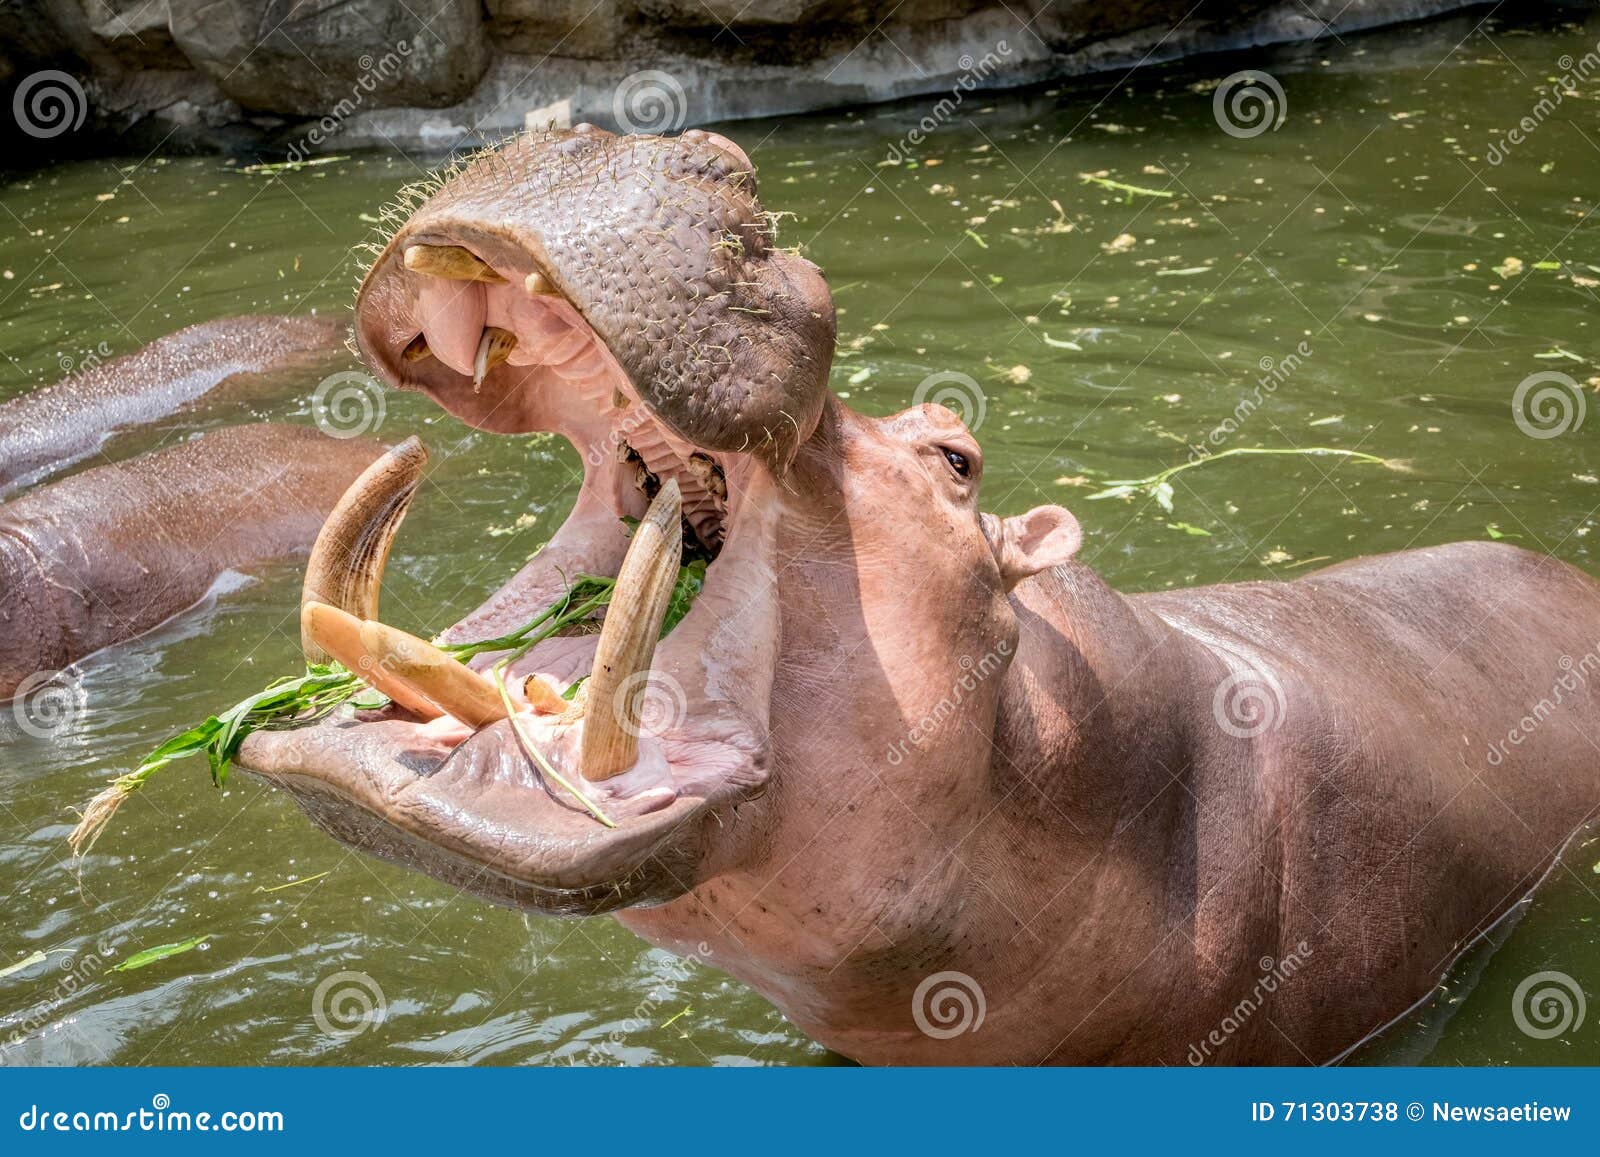 hippopotamus showing mouth and teeth